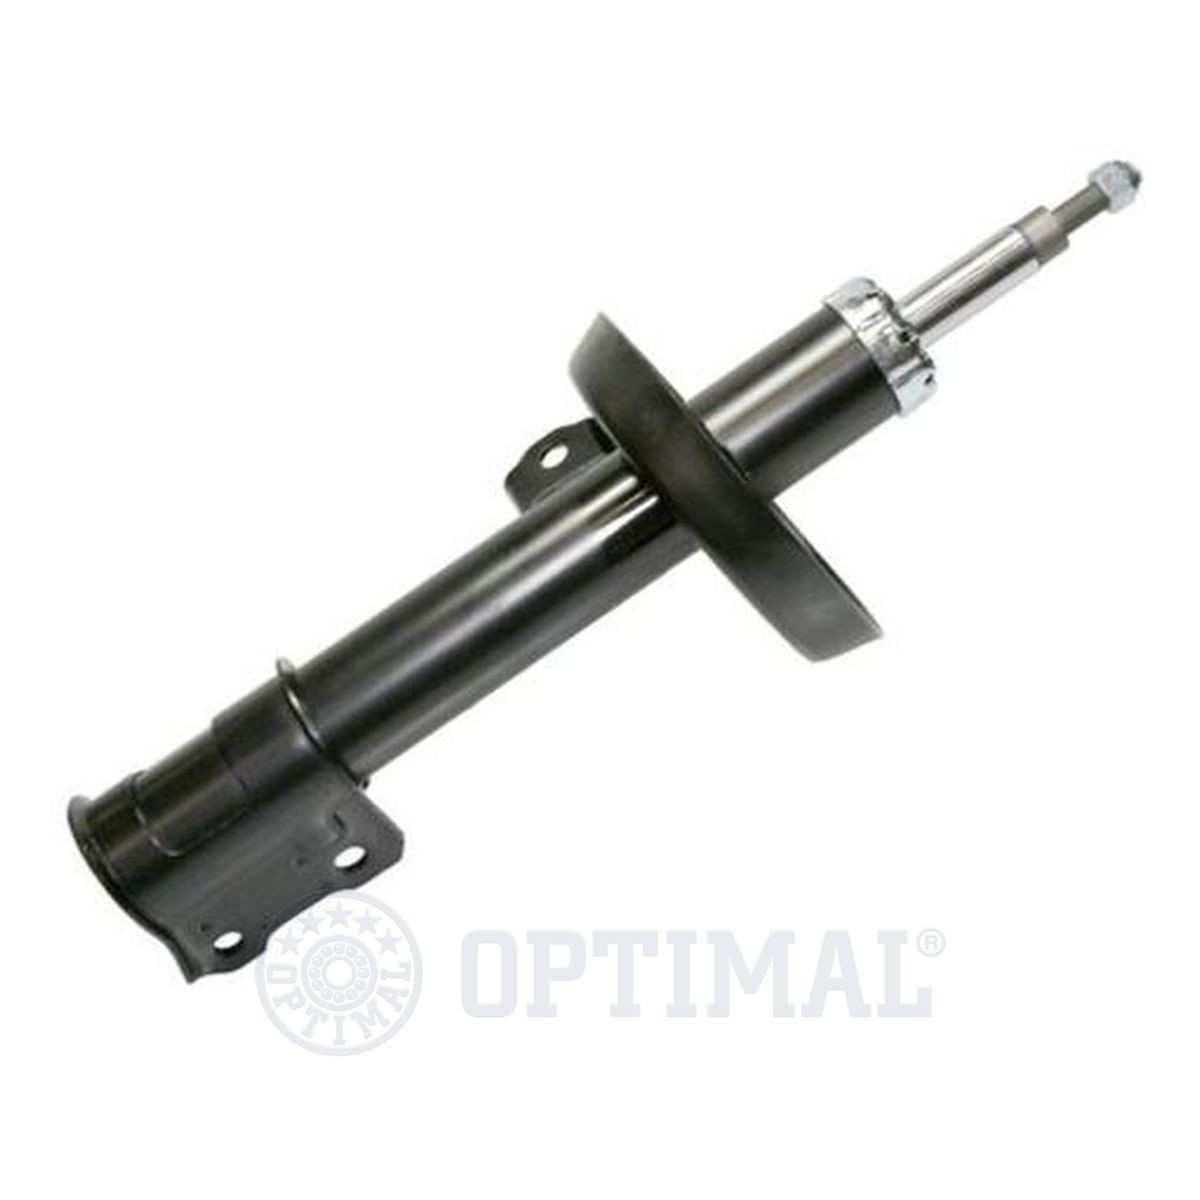 OPTIMAL Front Axle Left, Oil Pressure, Twin-Tube, Spring-bearing Damper, Top pin, Bottom Clamp, M12x1,25 Shocks A-18586HL buy